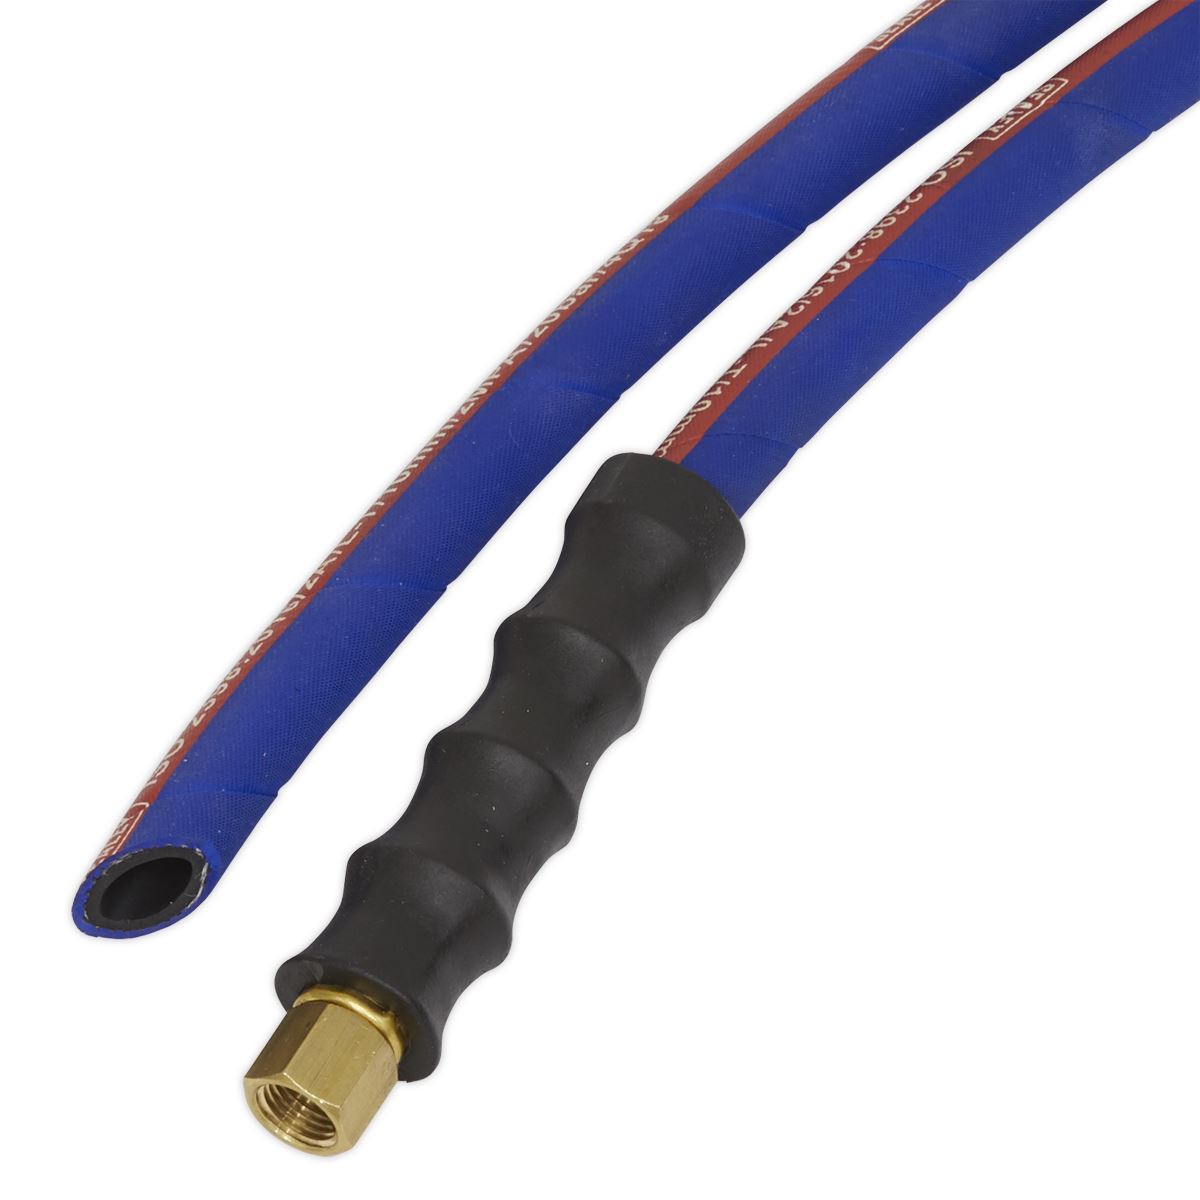 Sealey Air Hose 10m x Ø8mm with 1/4"BSP Unions Extra-Heavy-Duty